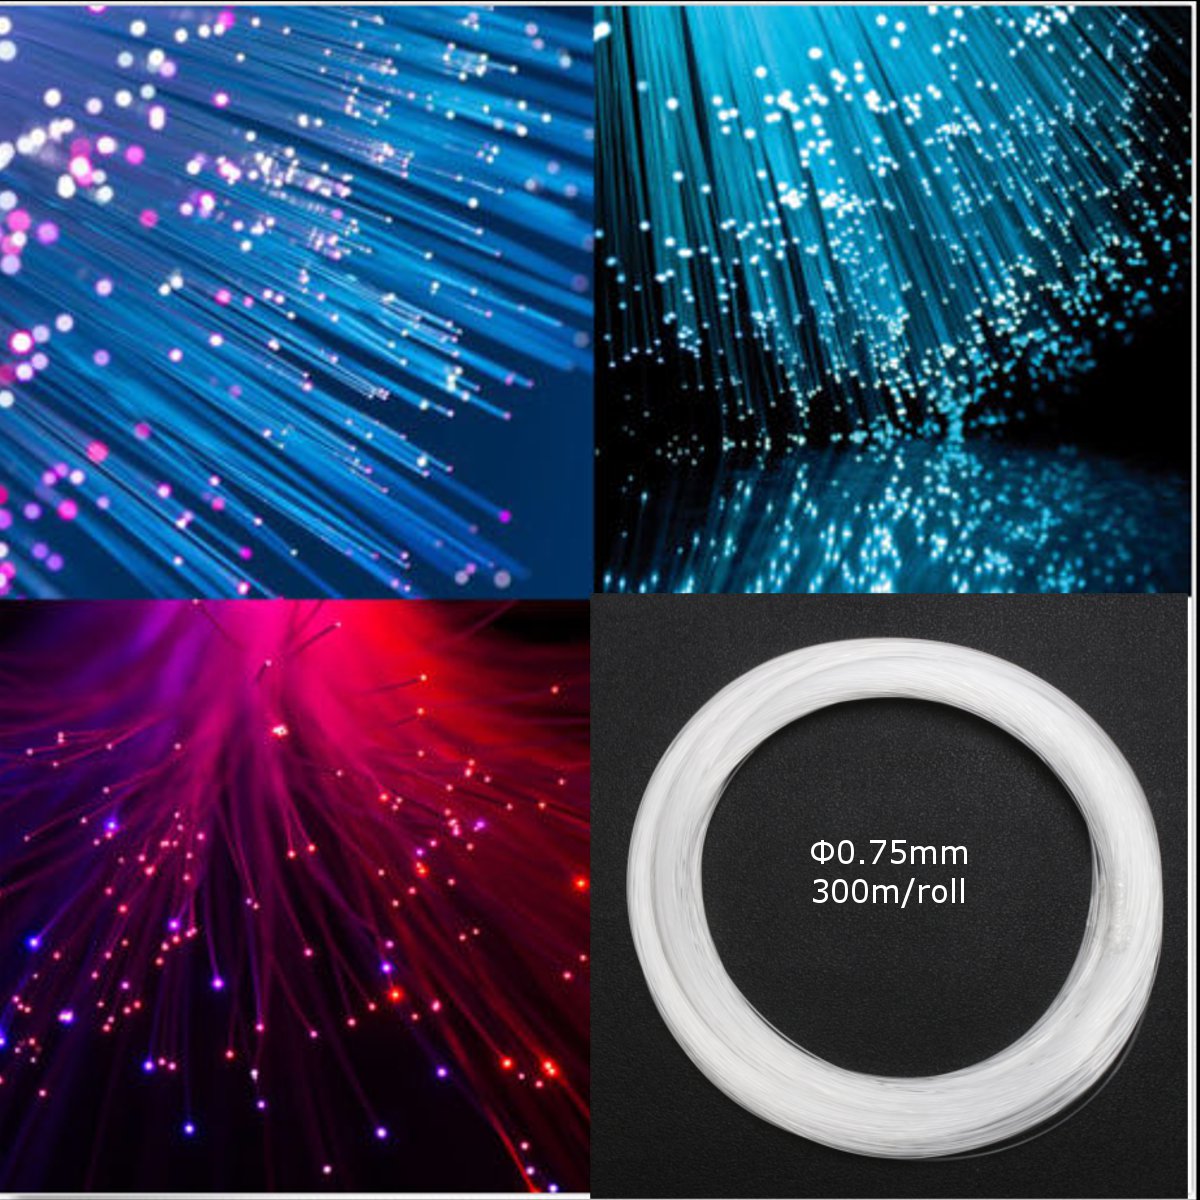 075mm-300mRoll-PMMA-Plastic-End-Glow-Fiber-Optic-Cable-For-Star-Sky-Ceiling-LED-Light-1225461